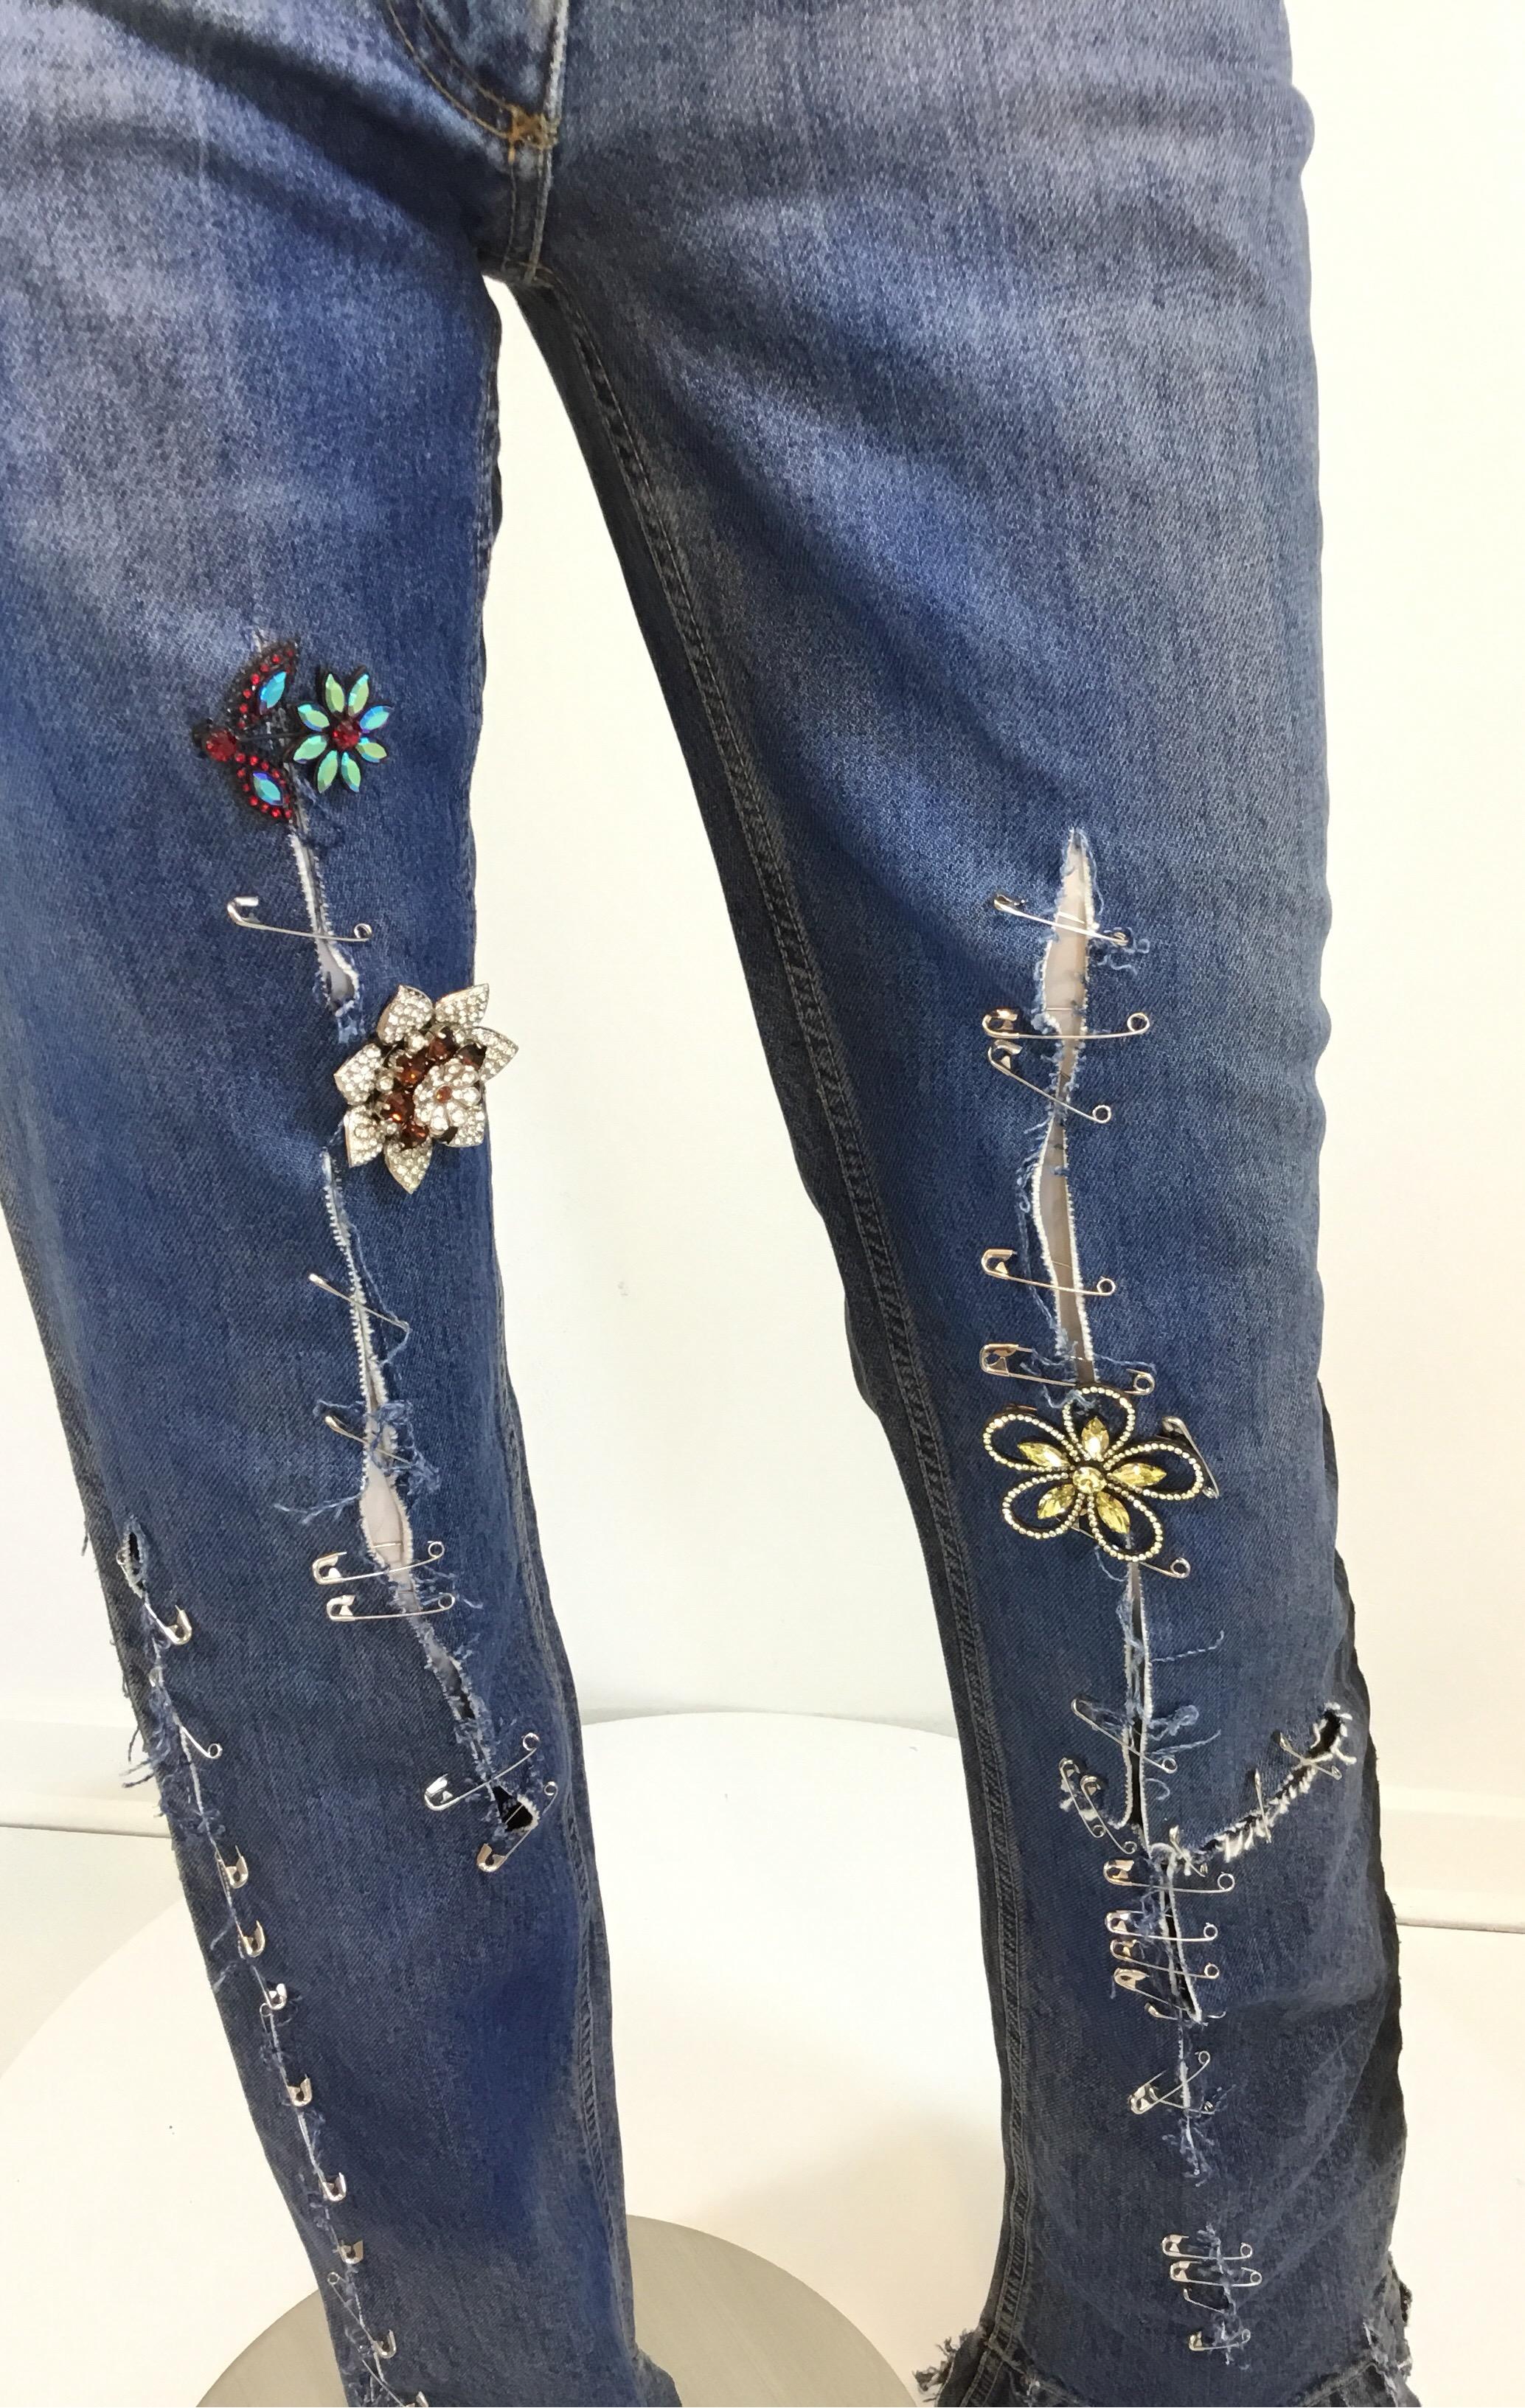 jeans with safety pins